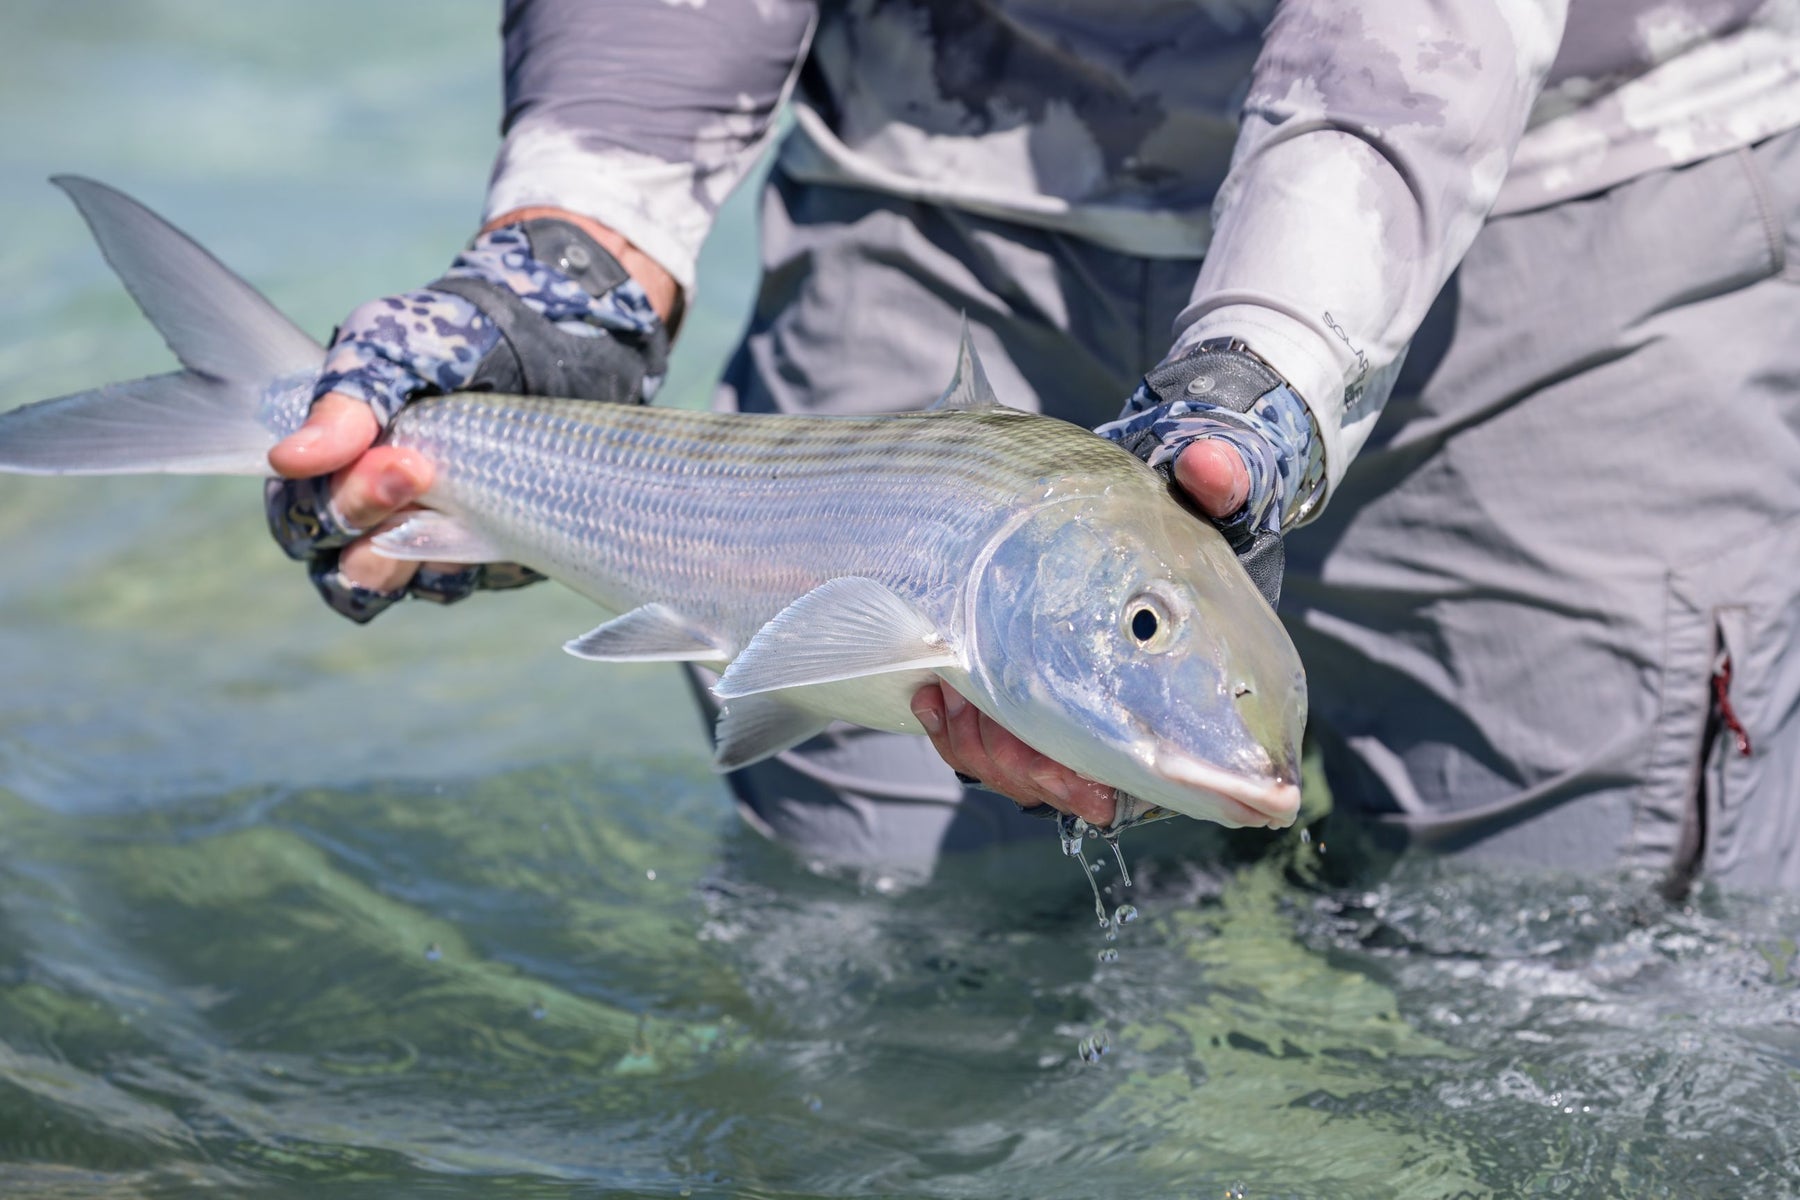 6 Great All-Ladies Fly Fishing Trips to Take, from Female Anglers